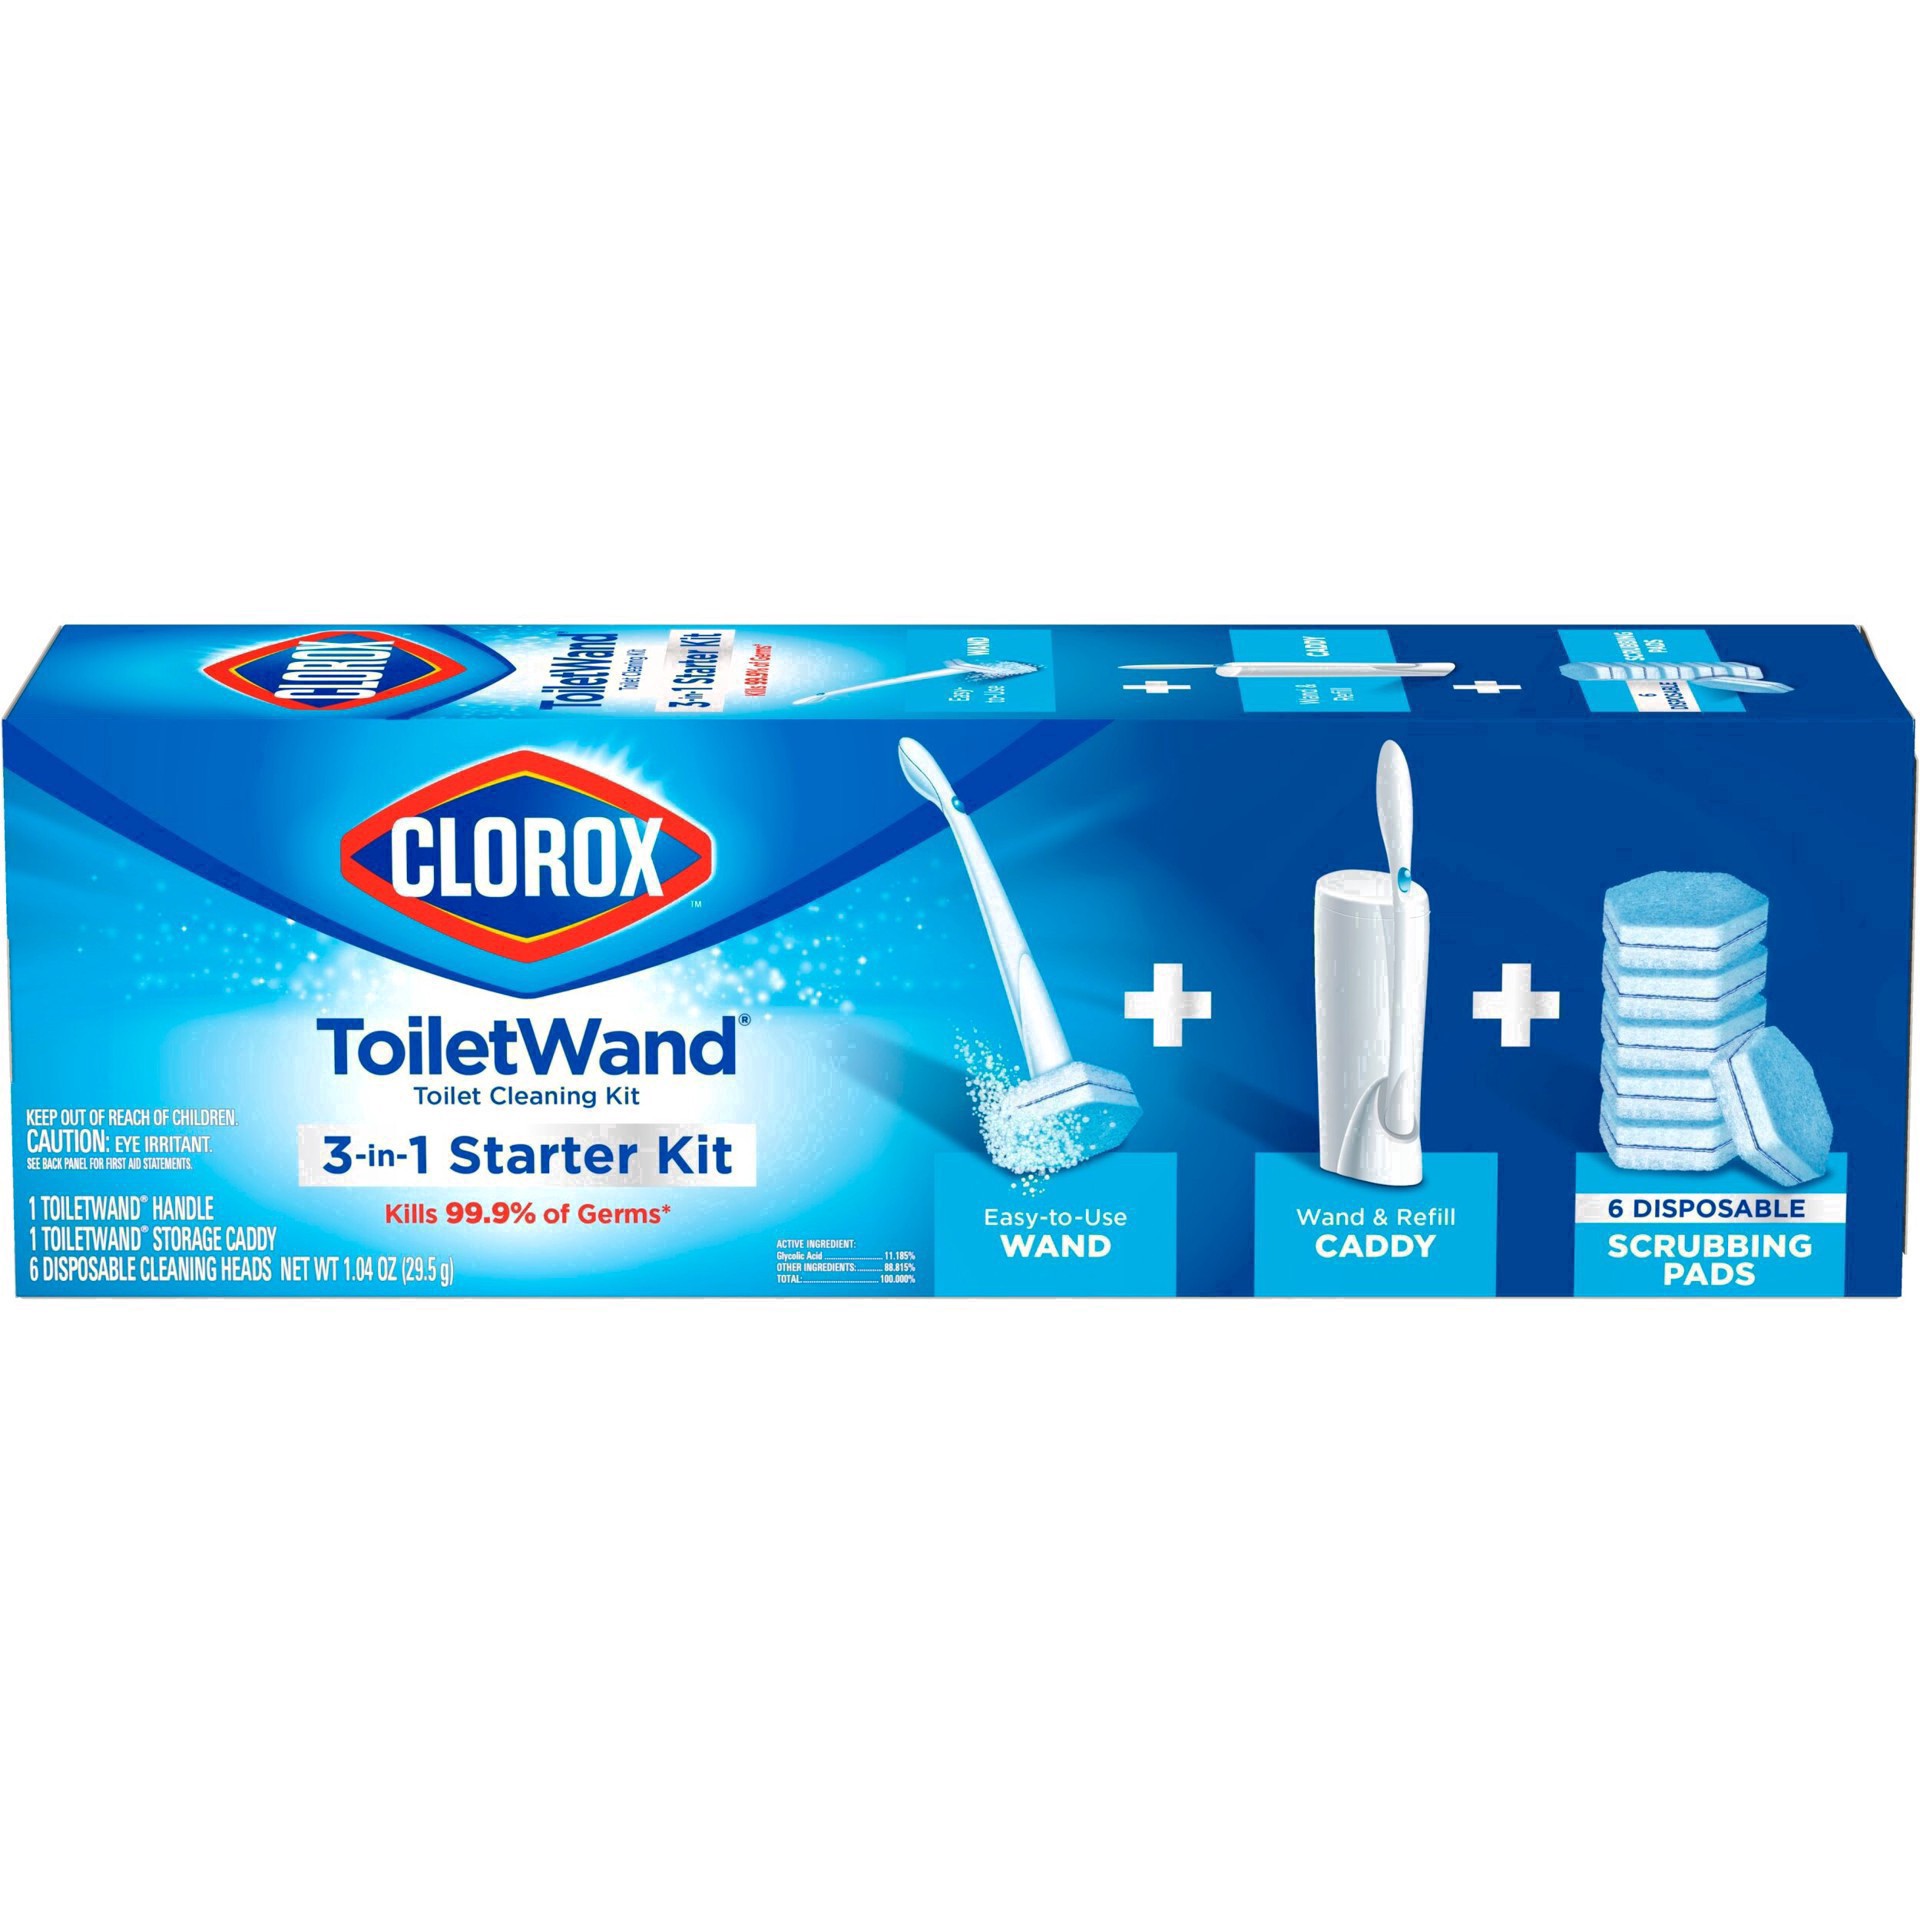 slide 3 of 176, Clorox Toilet Wand 3-in-1 Starter Toliet Cleaning Kit, 1 ct